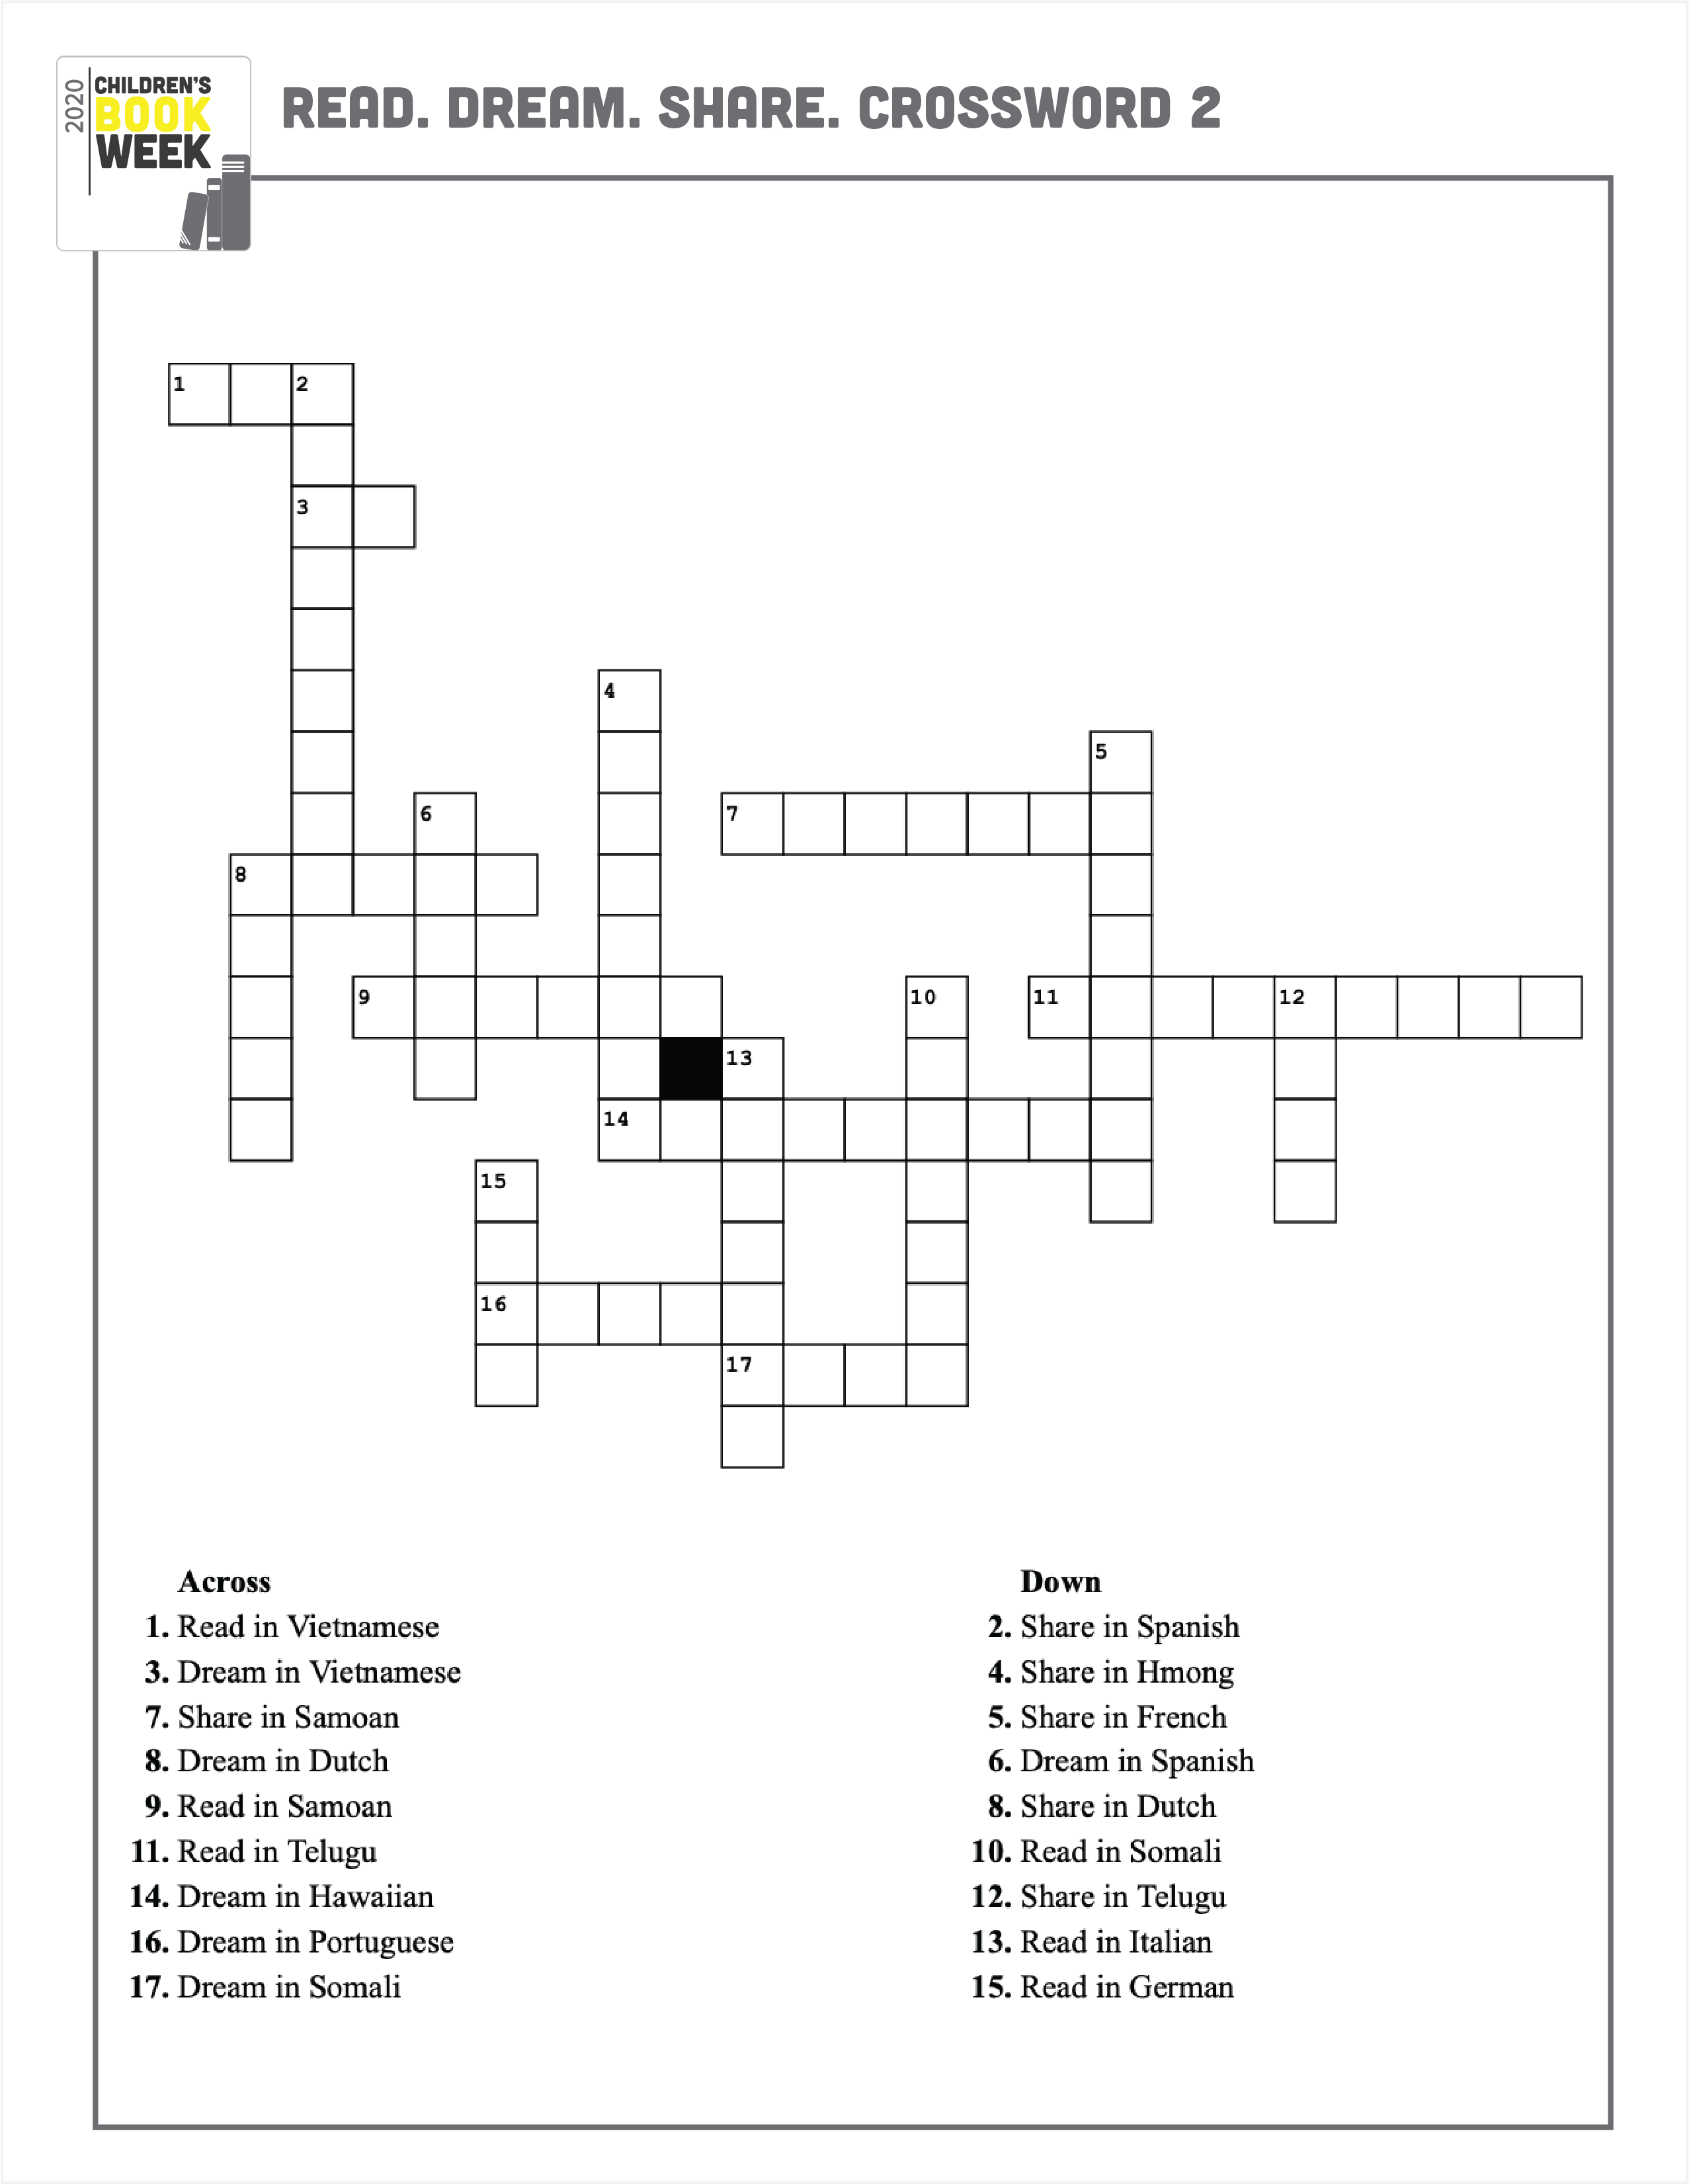 Crossword 2 Page